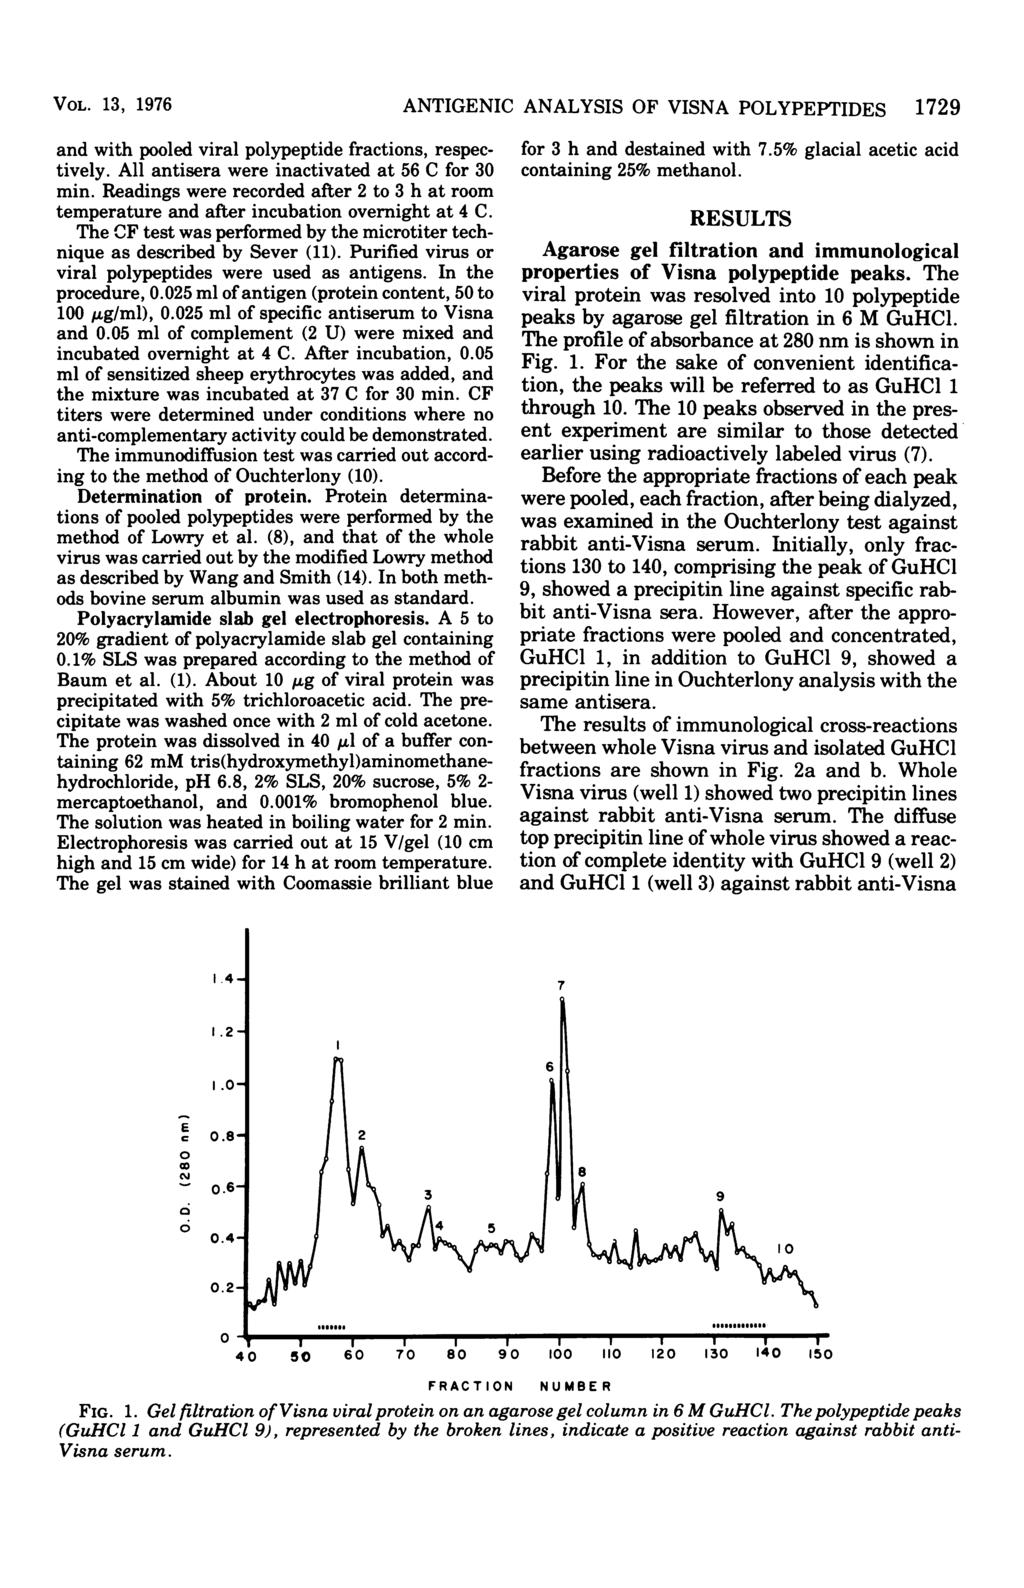 VOL. 13, 1976 and with pooled viral polypeptide fractions, respectively. All antisera were inactivated at 56 C for 3 min.